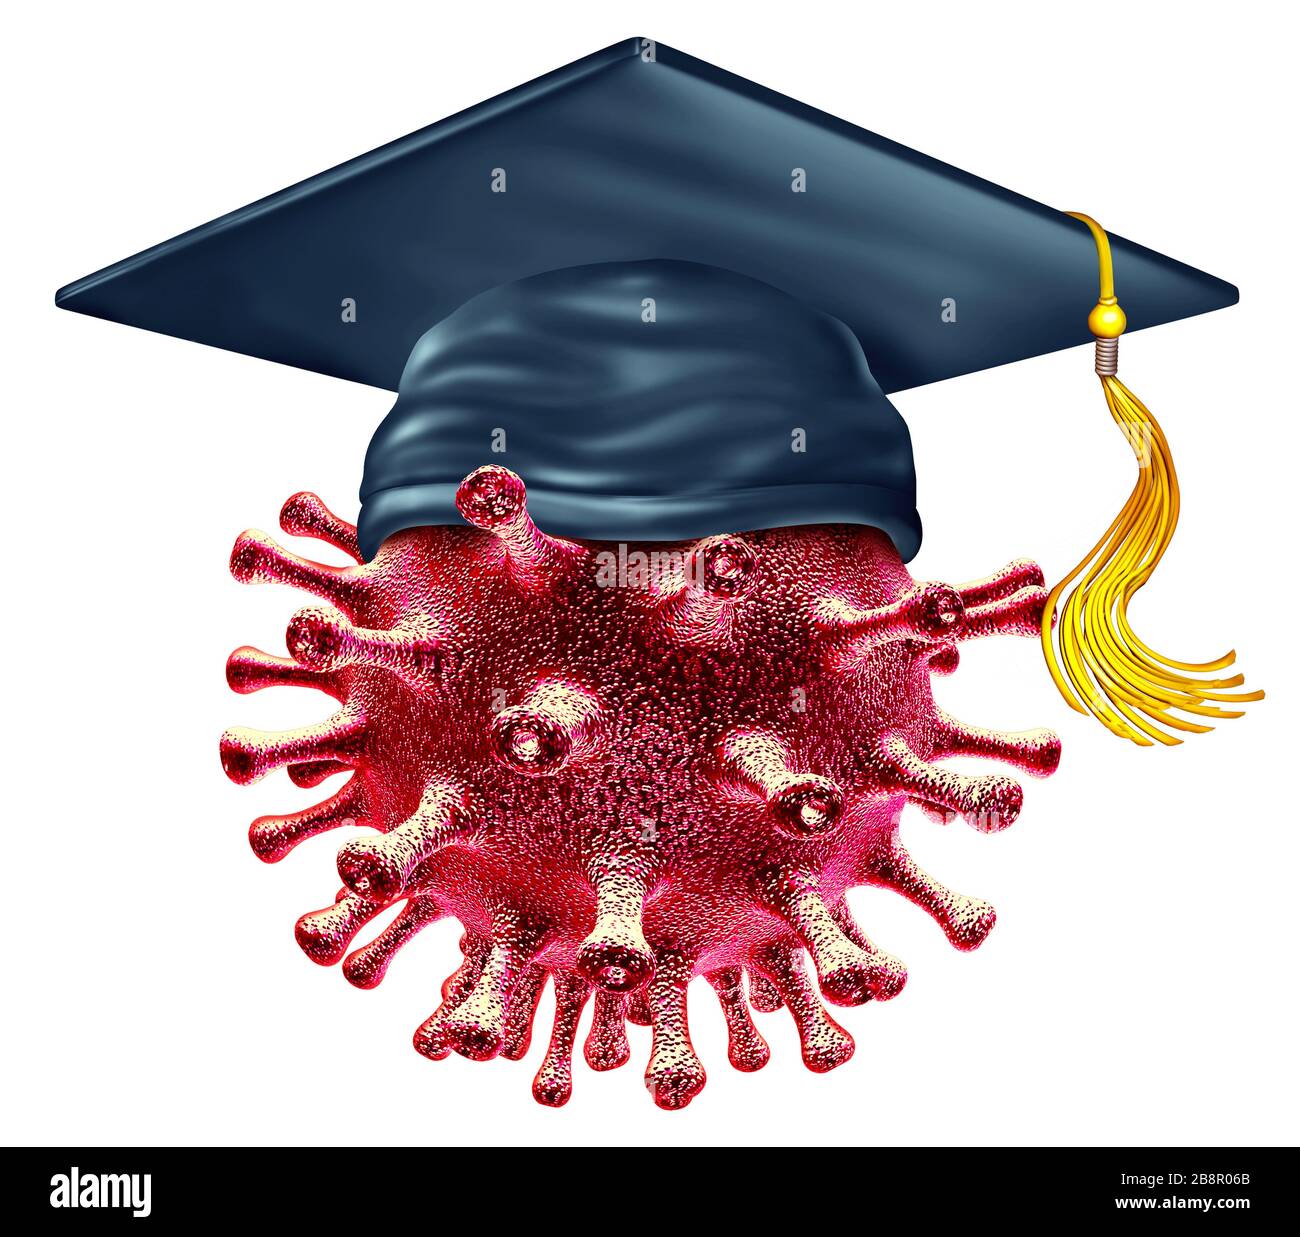 Virus outbreak and students as deadly public school health risk and coronavirus disease and flu or influenza as a pandemic closing schools. Stock Photo